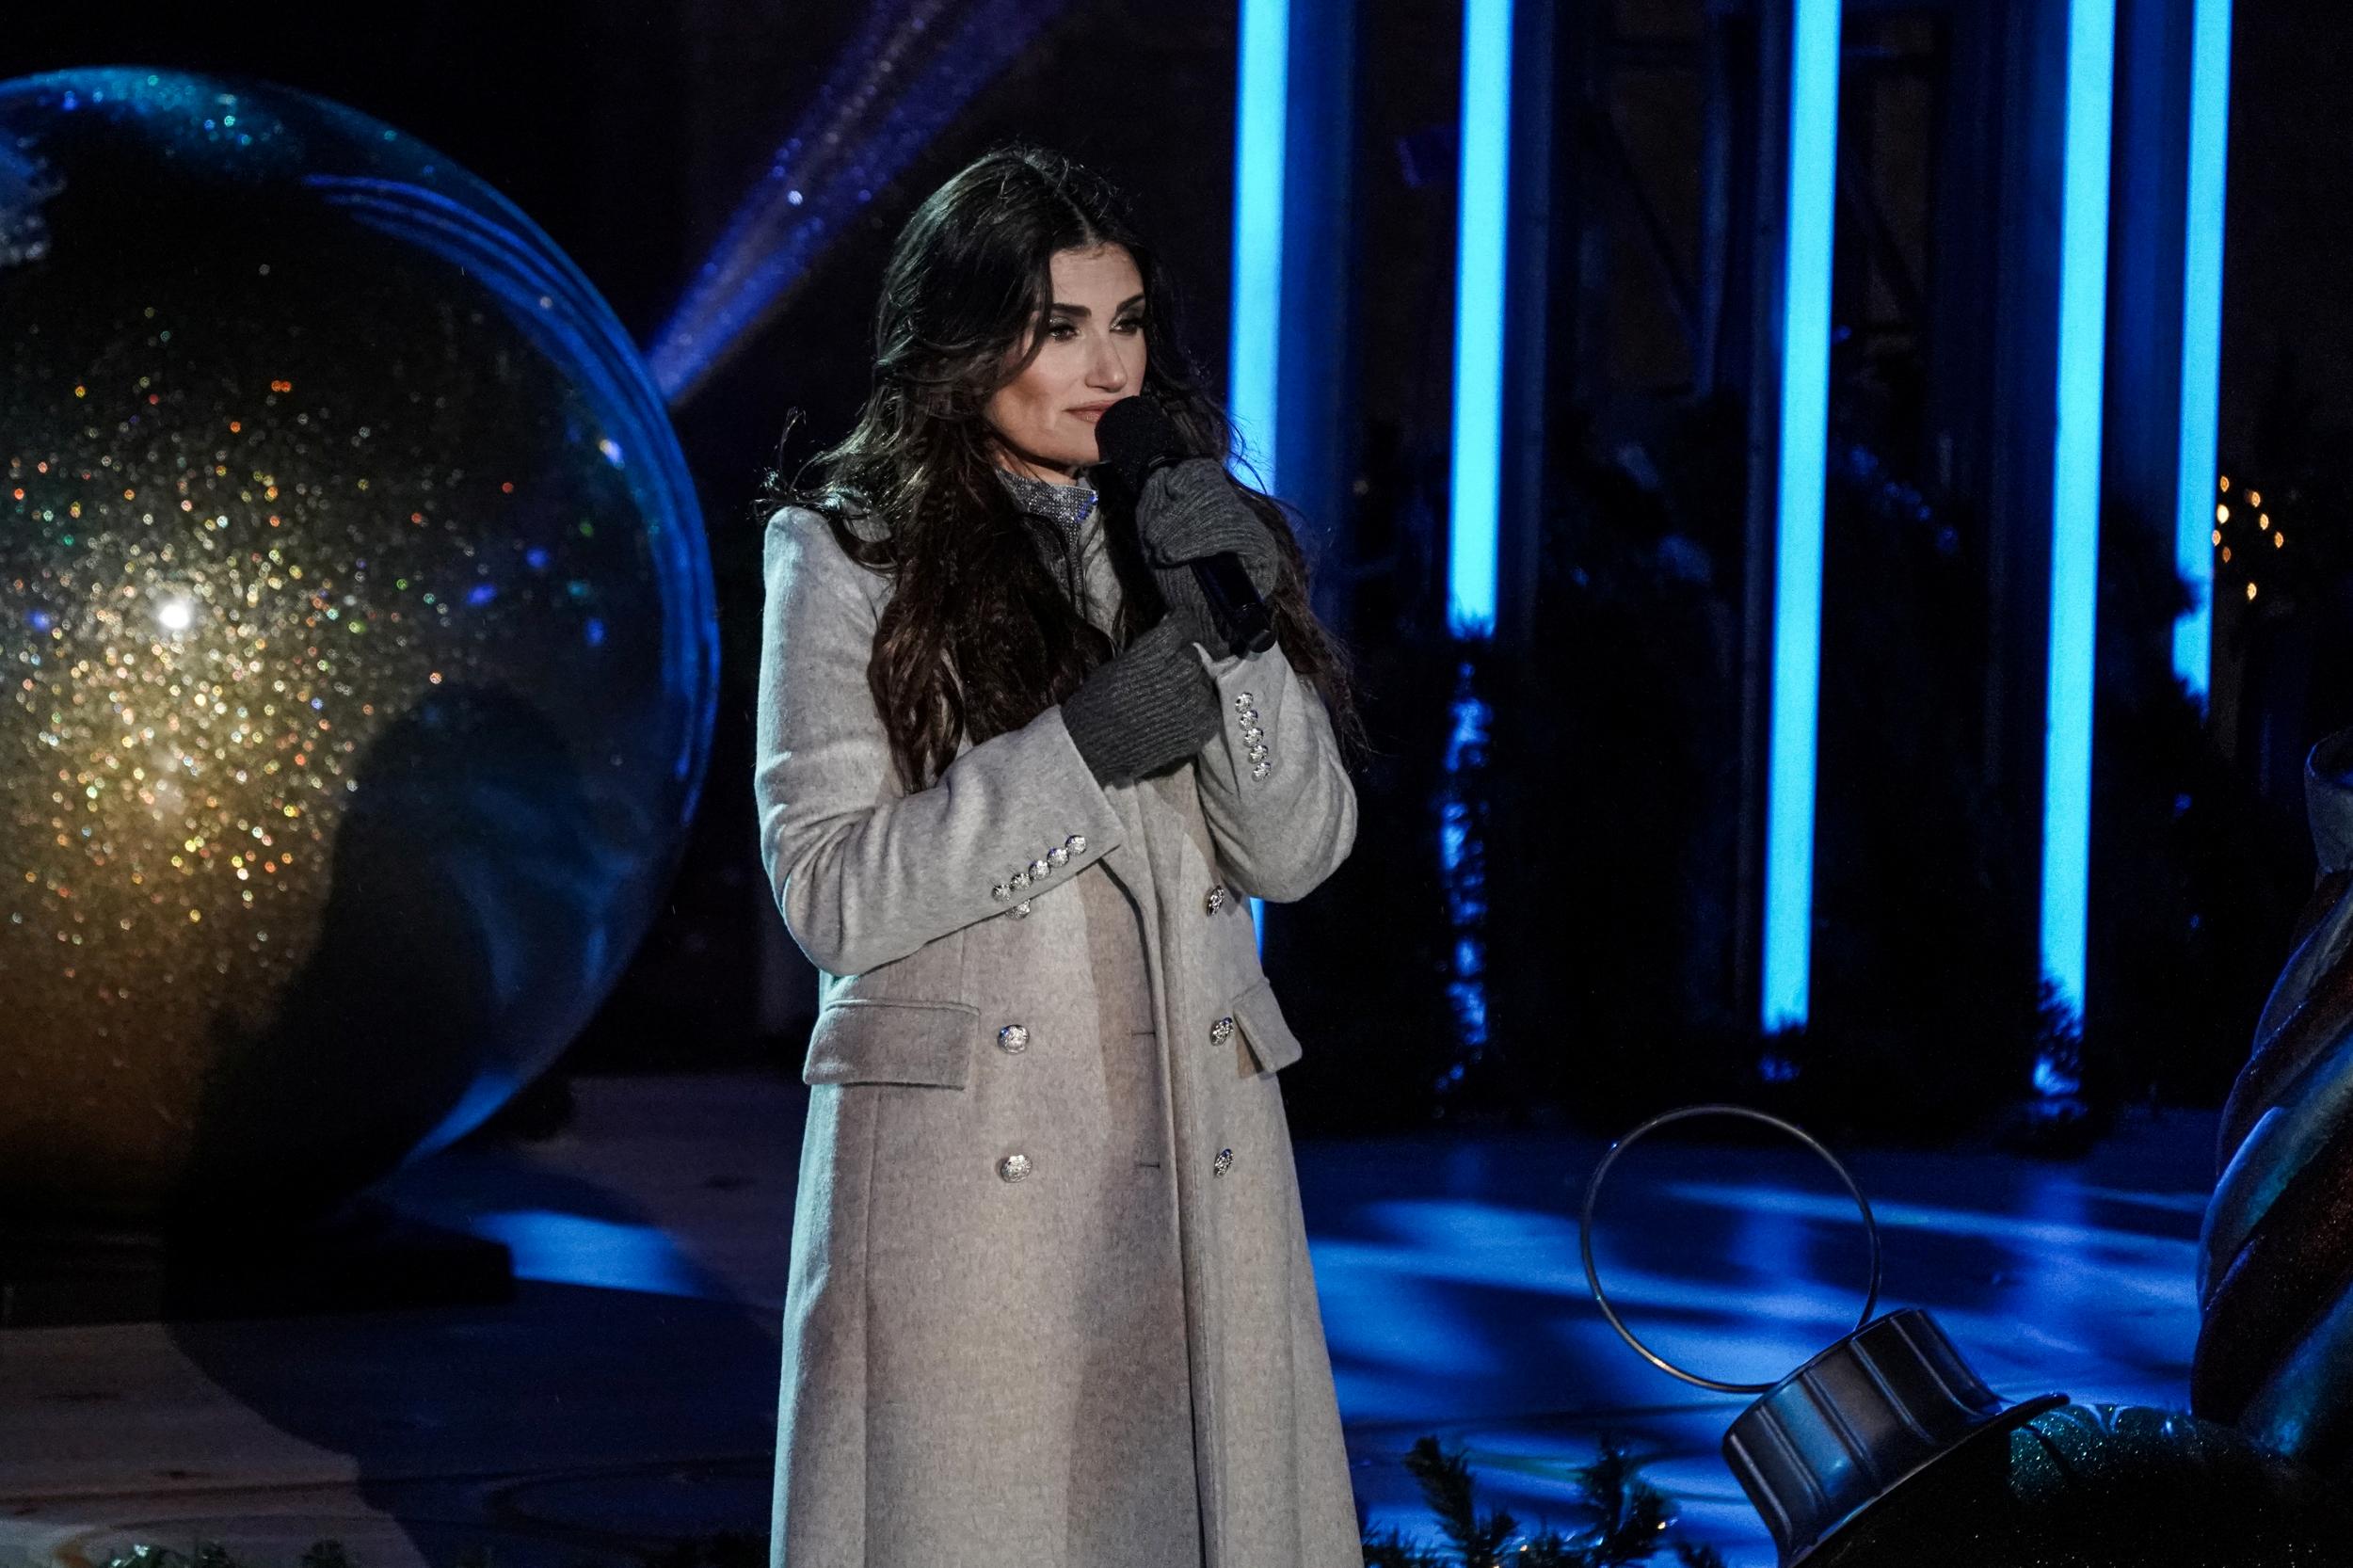 Disney+ will stream a live musical special from Epcot hosted by Idina Menzel